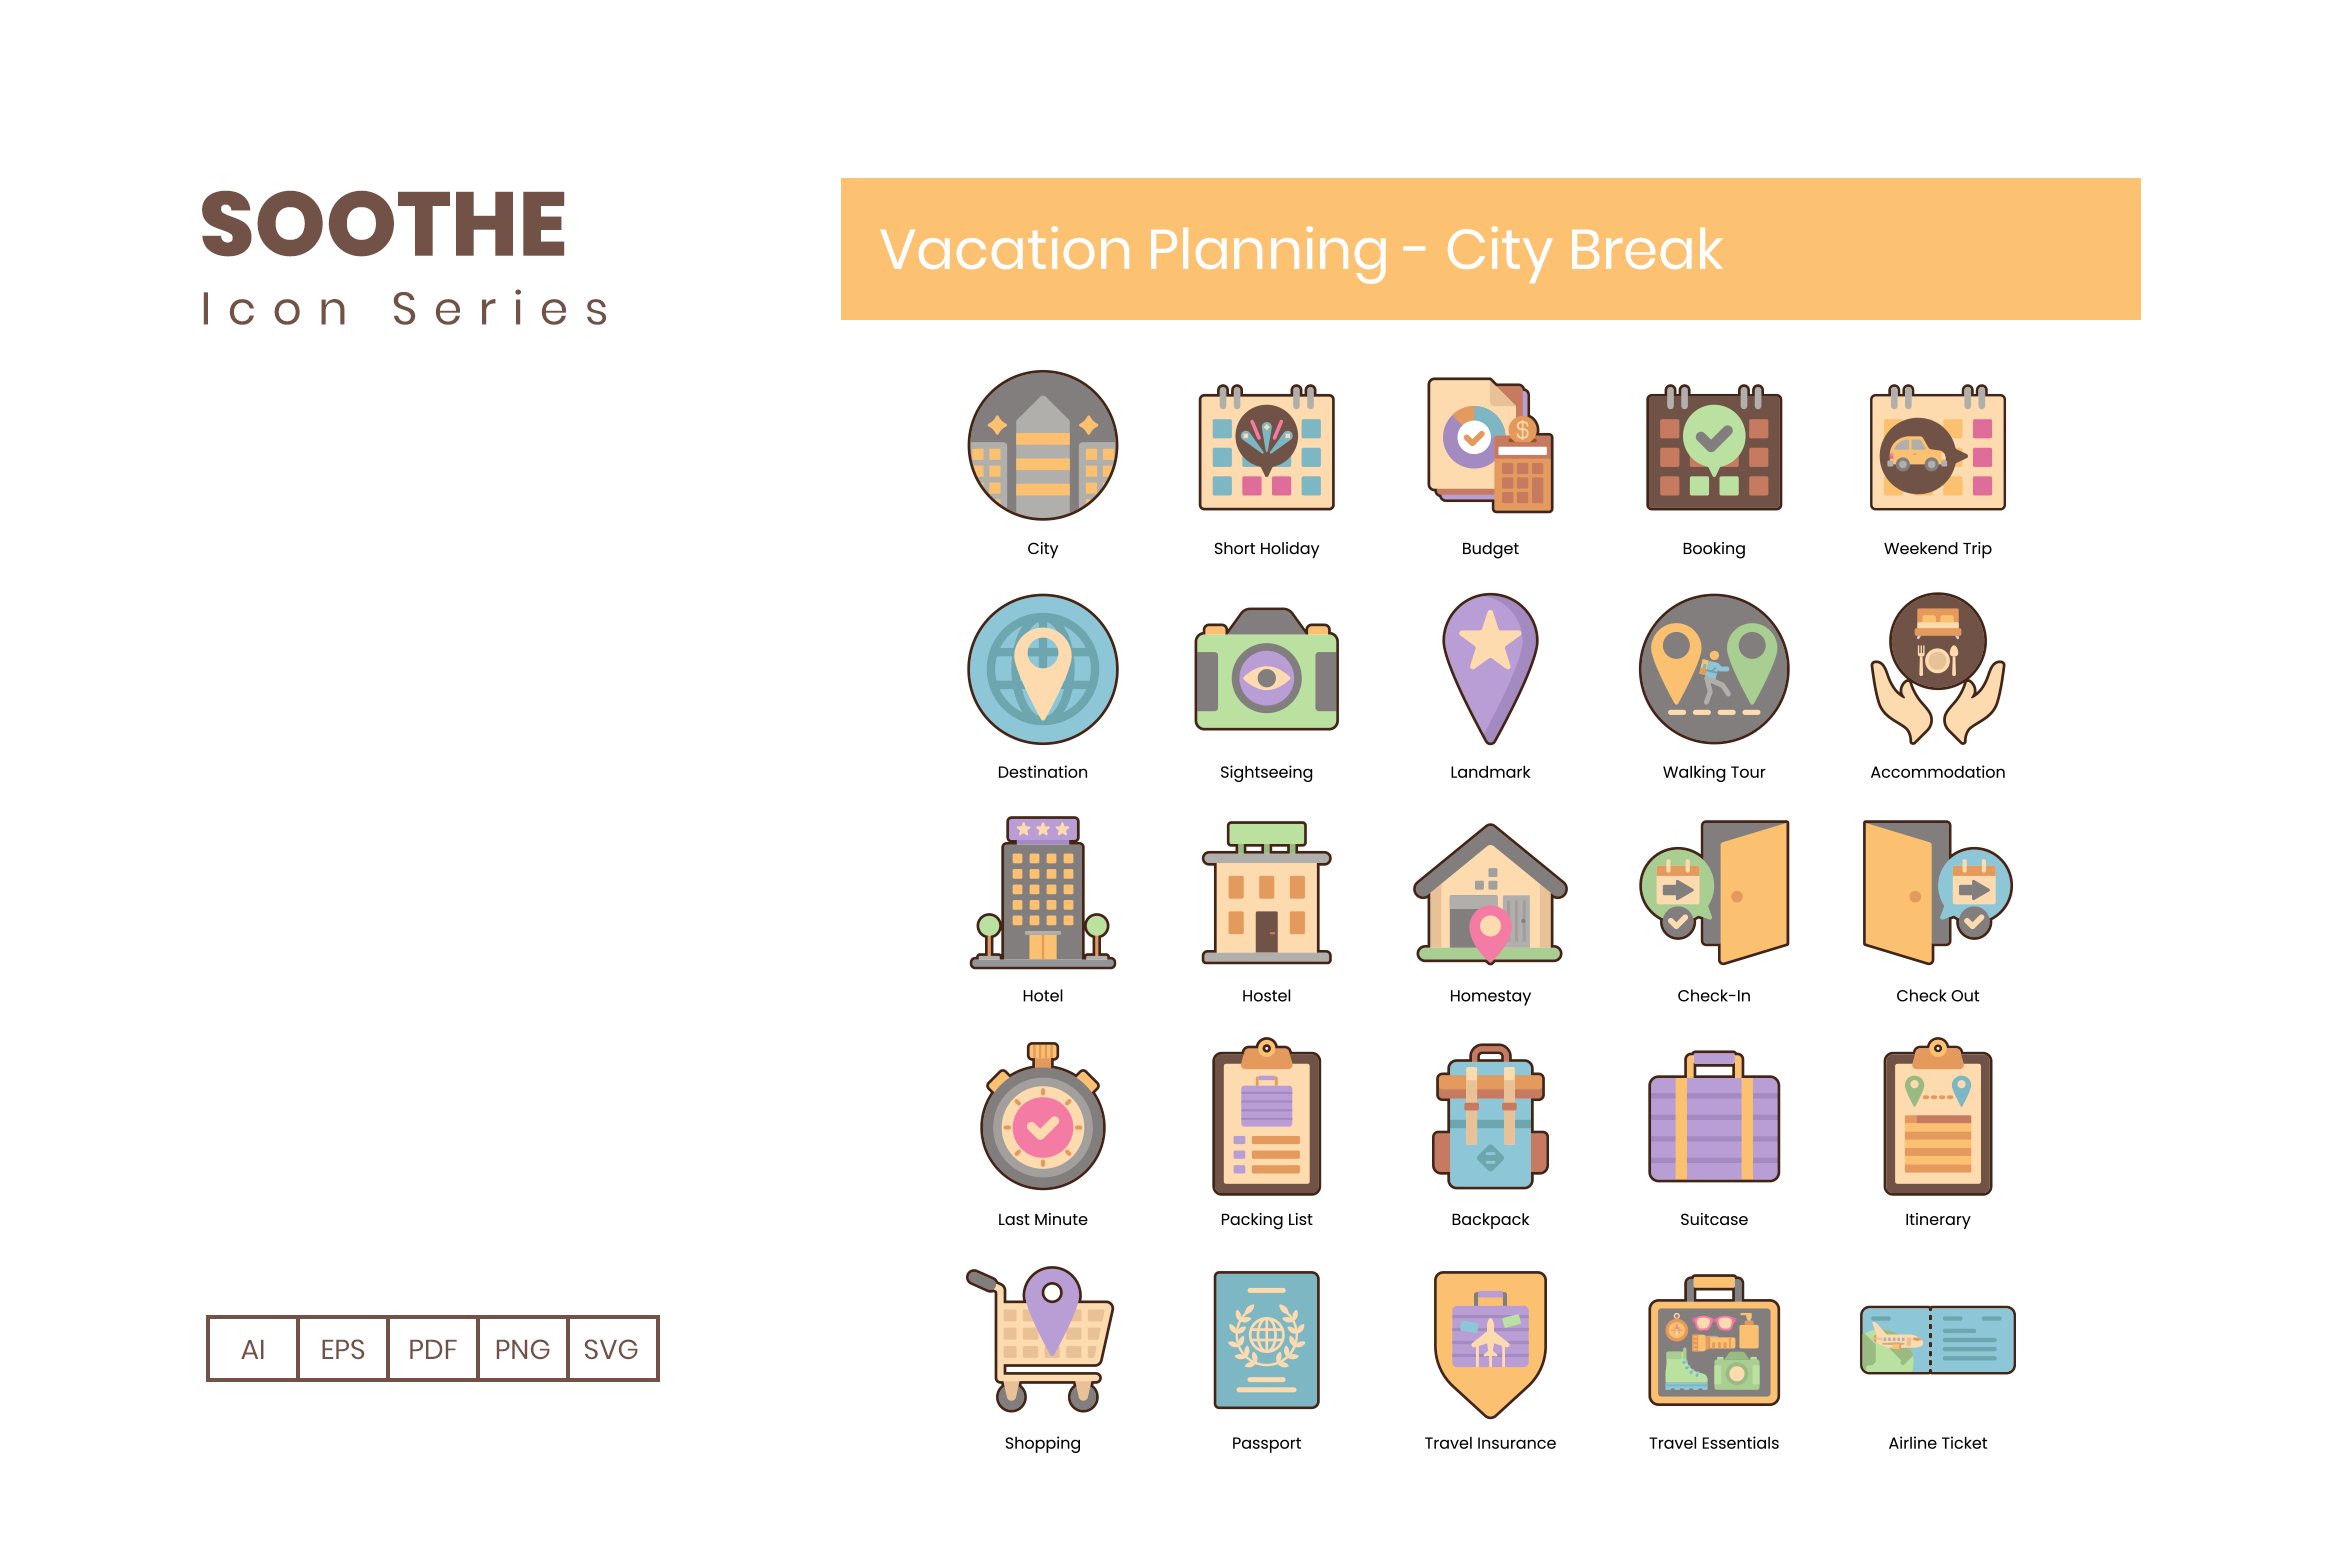 50 Vacation Planning - City Break preview image.